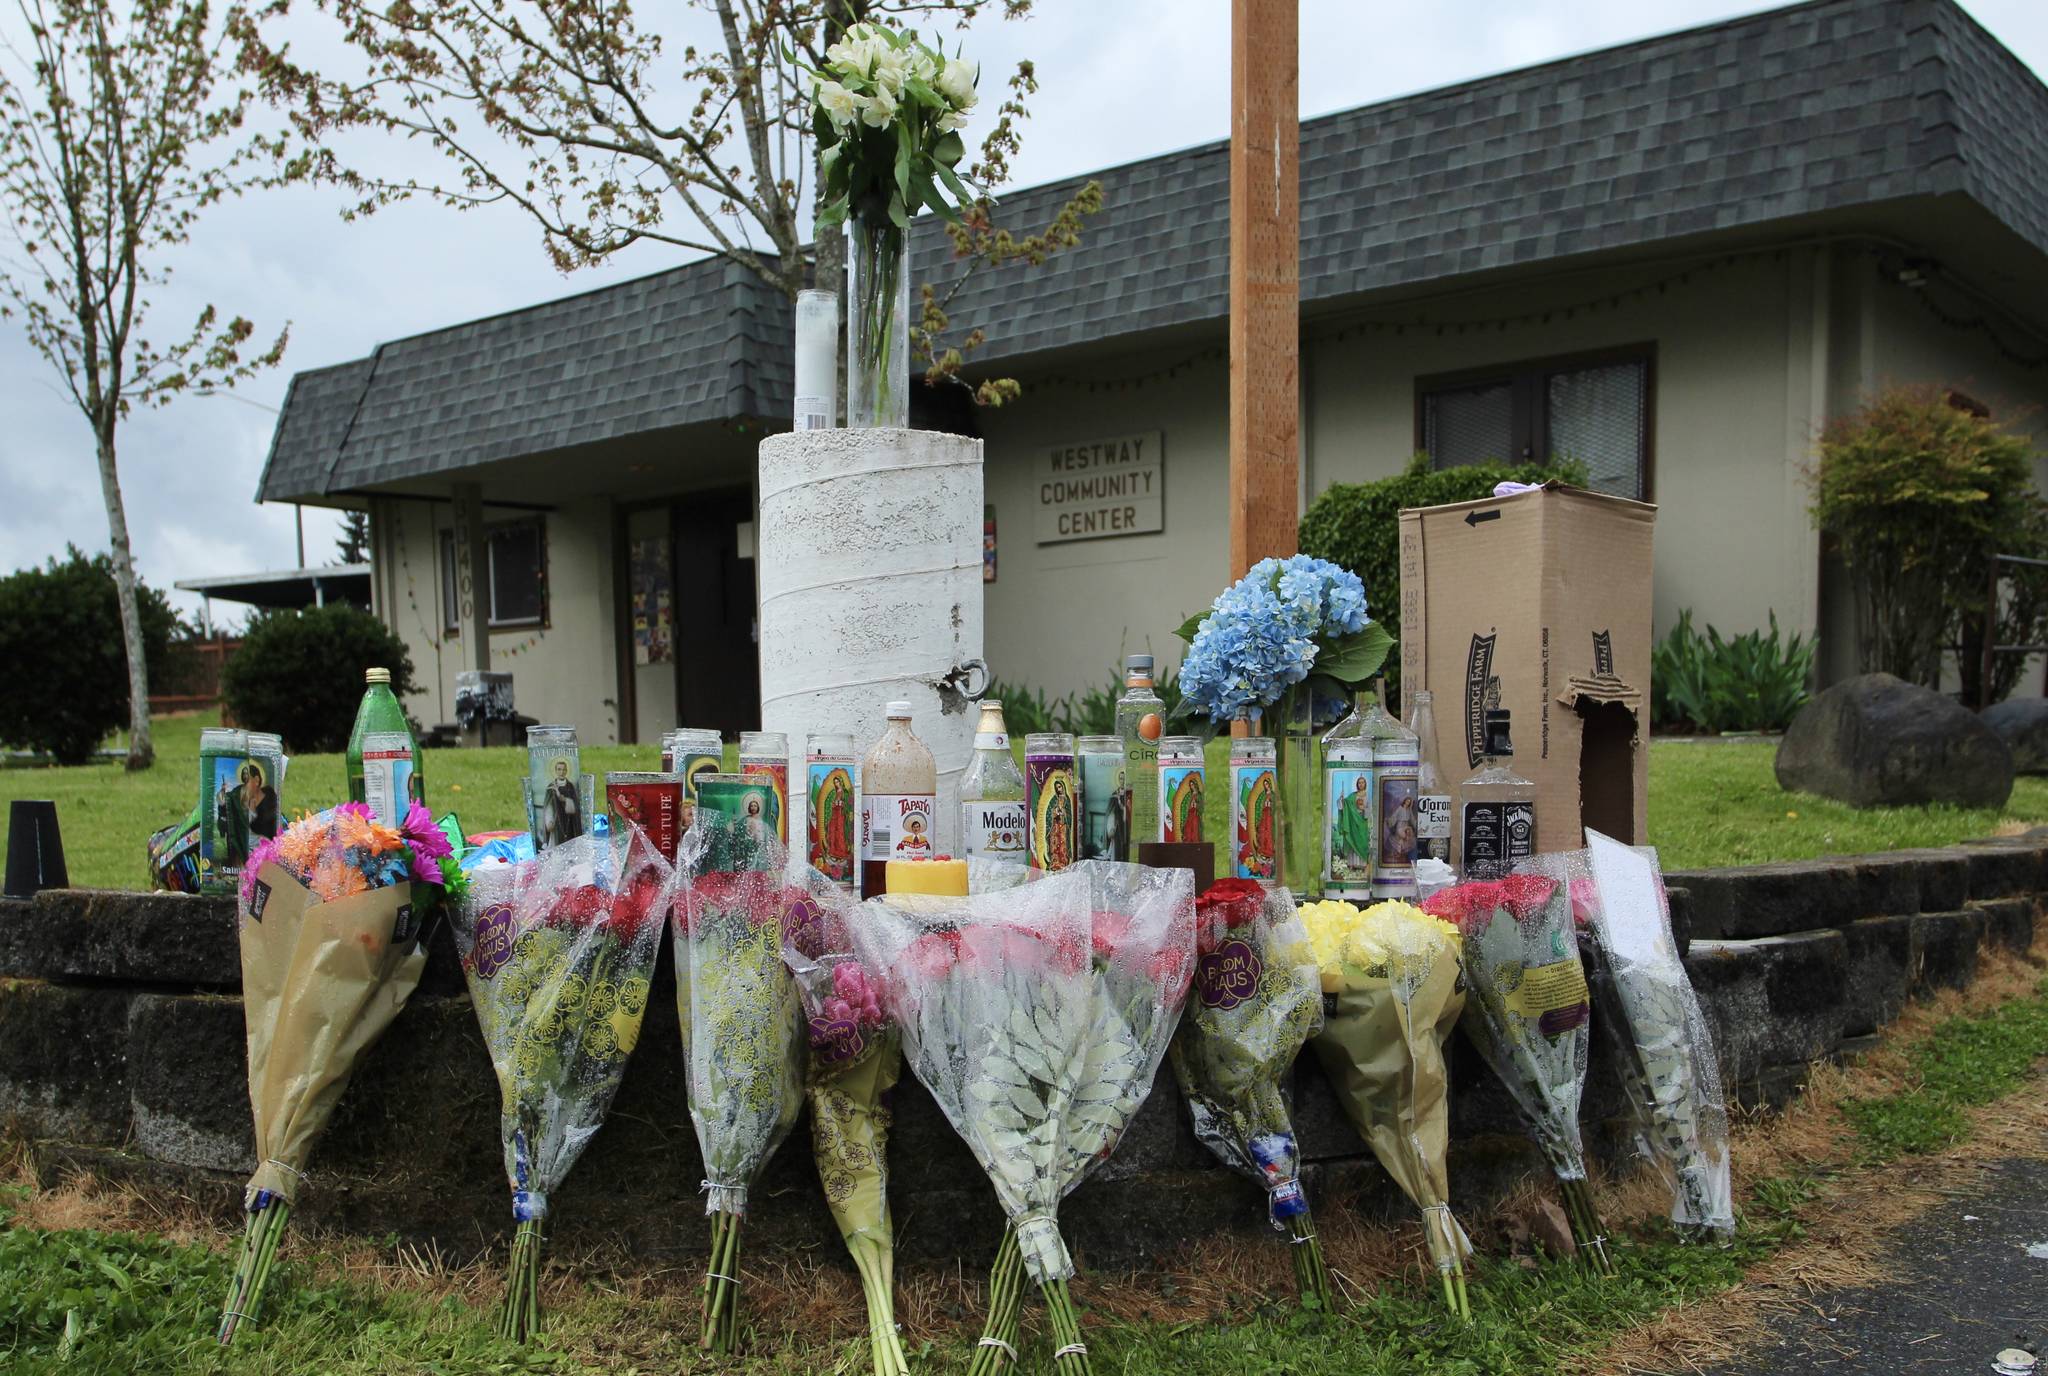 A memorial for 19-year-old Damien Helmbrecht was placed outside of the Westway Community Center on April 23,2020. Olivia Sullivan/staff photo